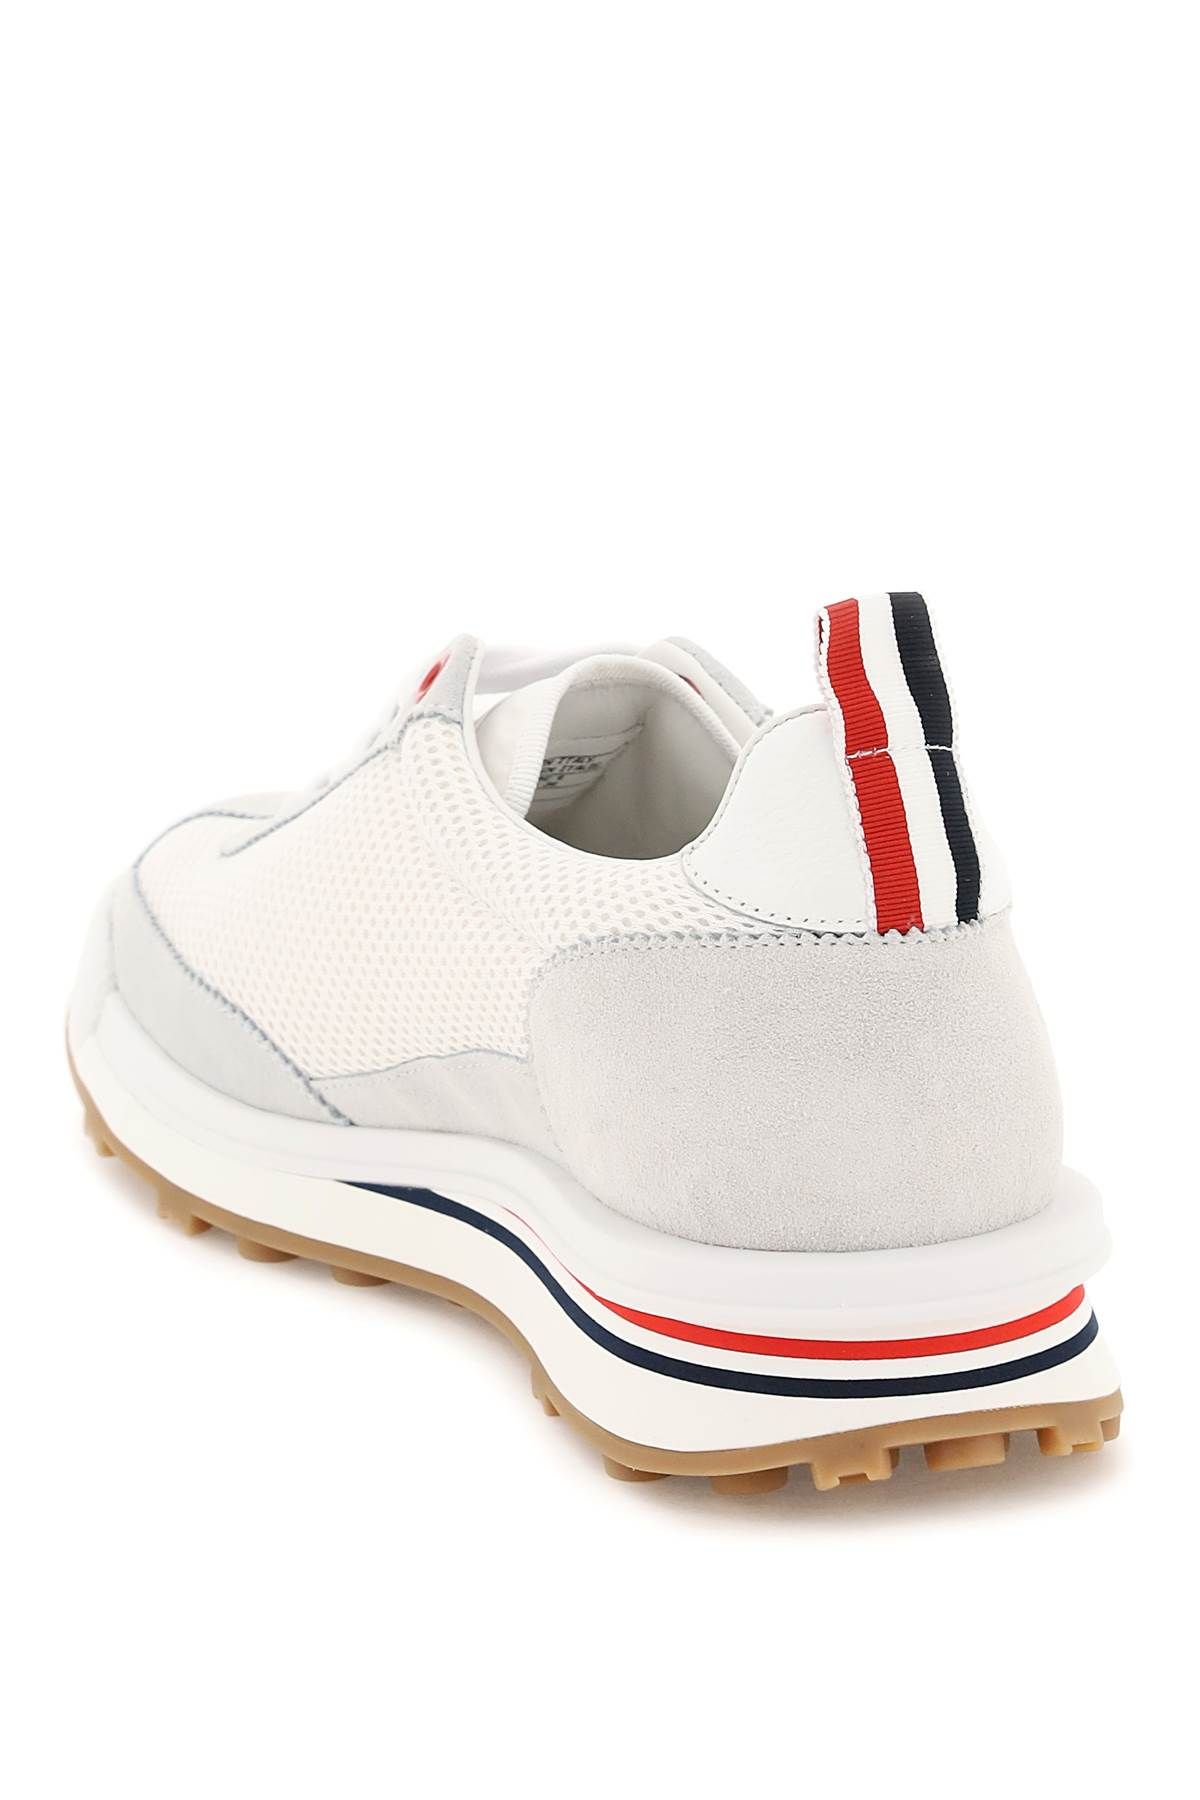 Shop Thom Browne Tech Runner Sneakers In White,grey